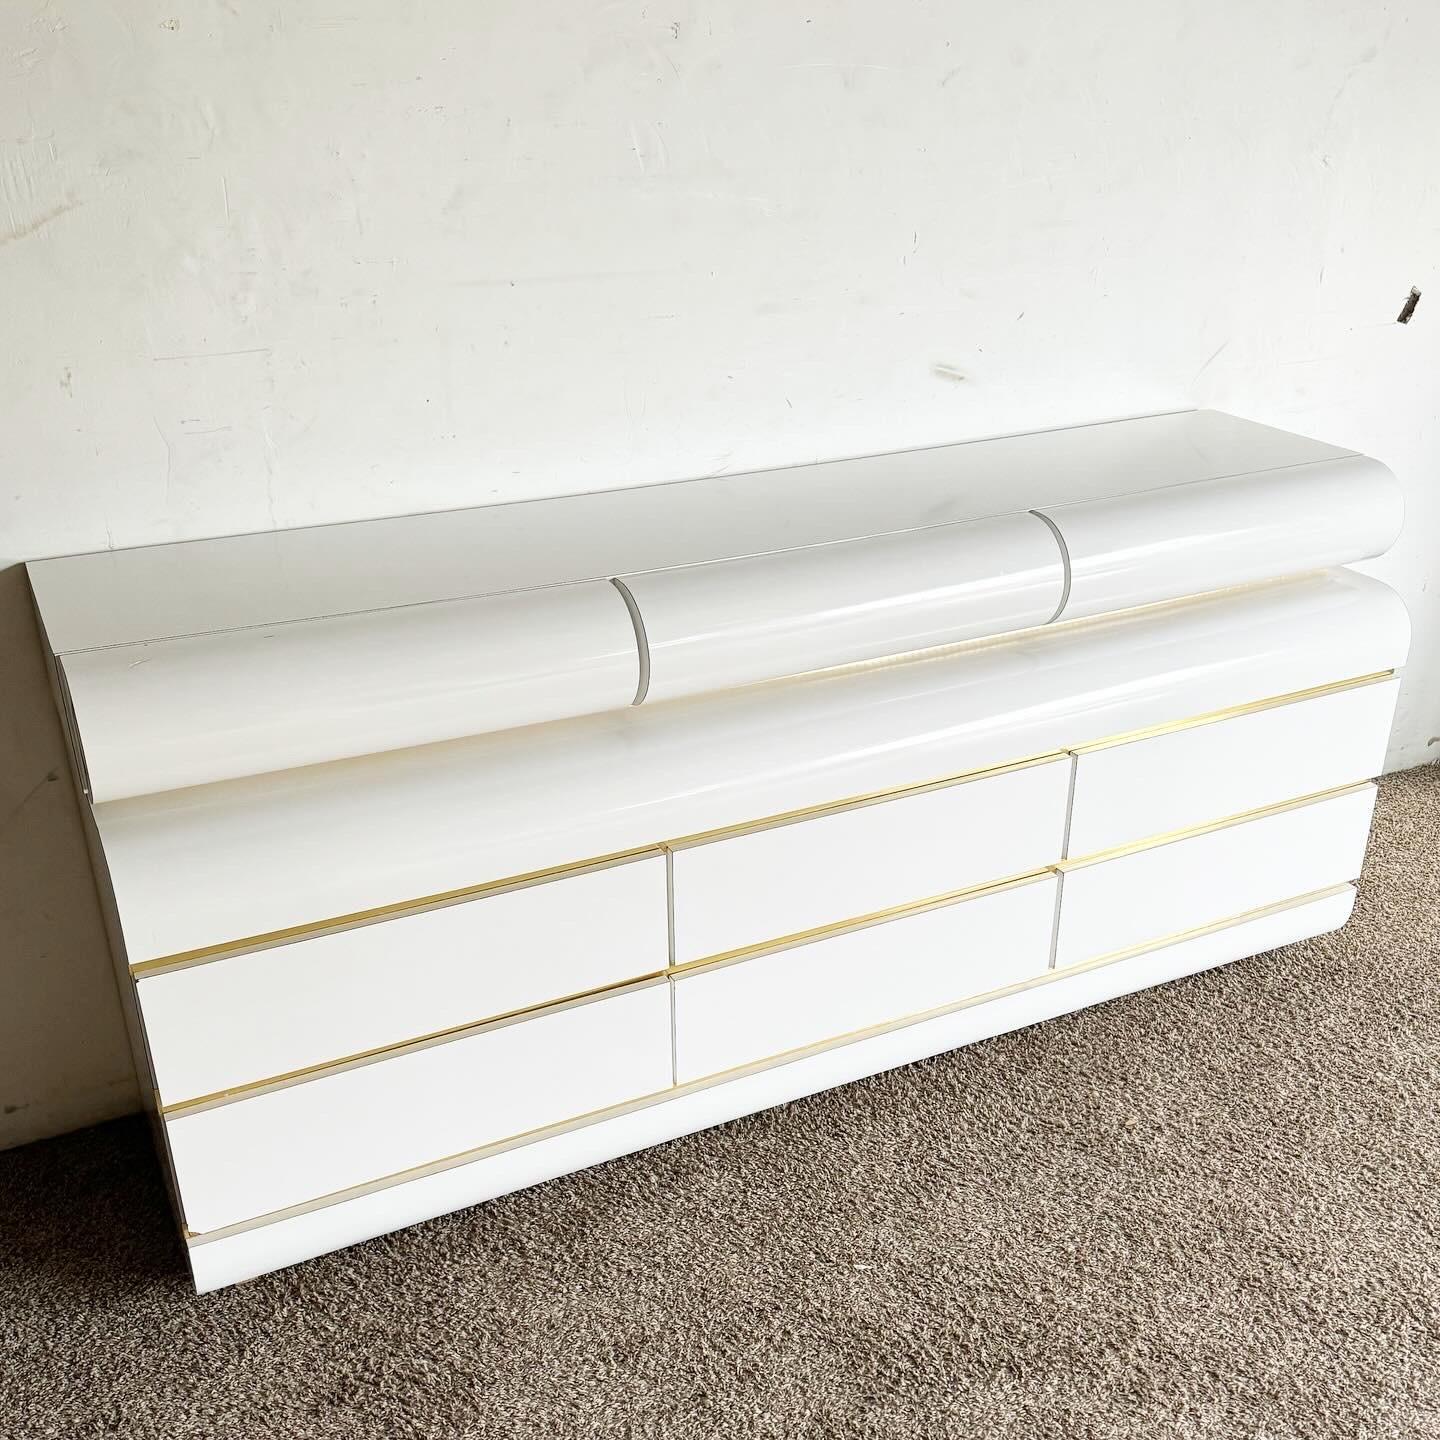 Revitalize your space with the Postmodern White Lacquer Laminate Bullnose Dresser, featuring a removable top and gold accents. This dresser's minimalist silhouette, smooth bullnose edges, and crisp white finish embody contemporary elegance. The